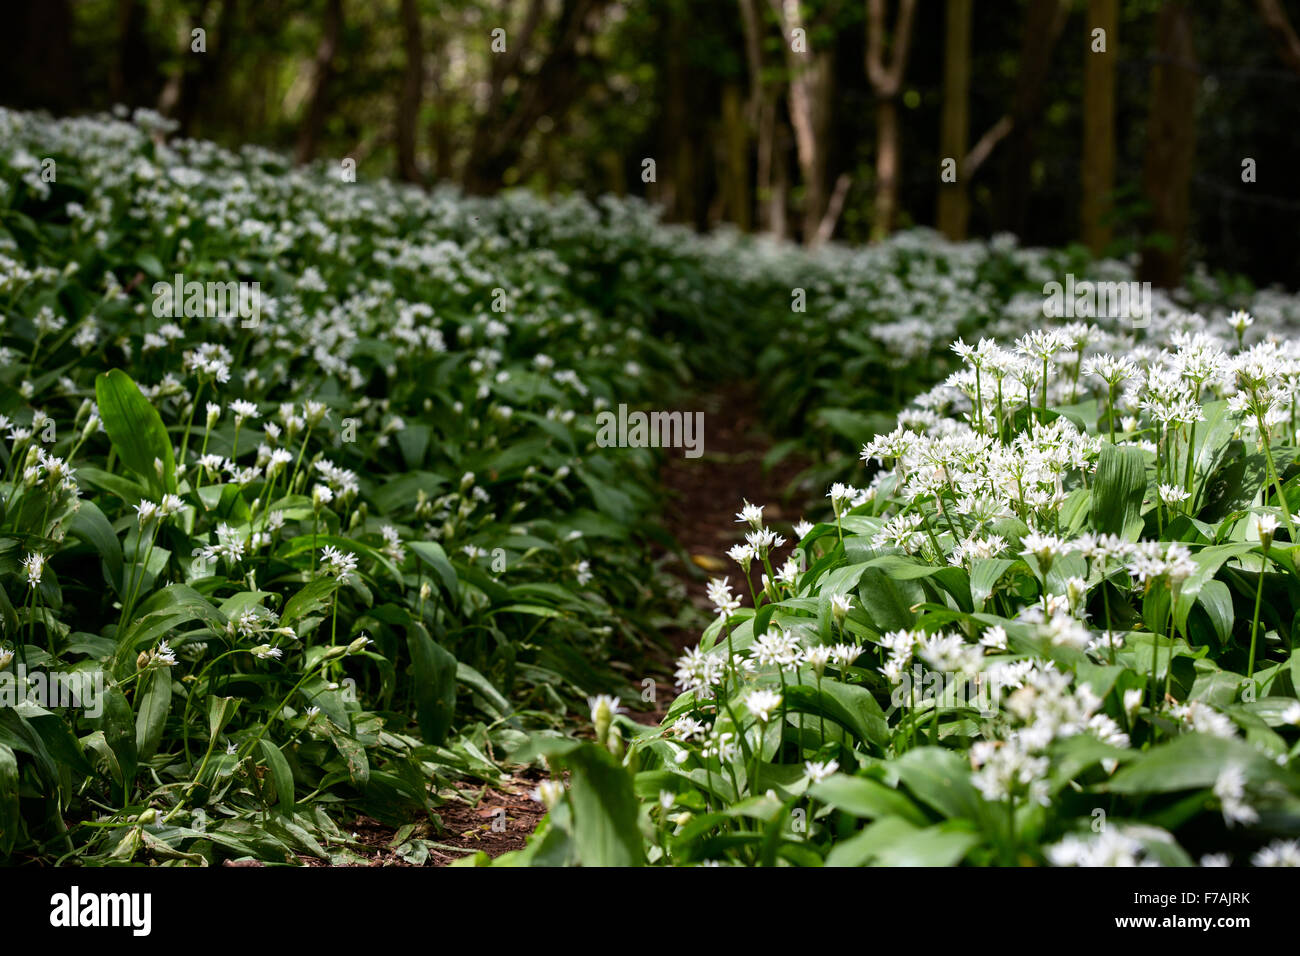 Wild garlic, Allium ursinum in bloom during spring growing alongside a woodland path in the English countryside..The plants are an impressive sight Stock Photo